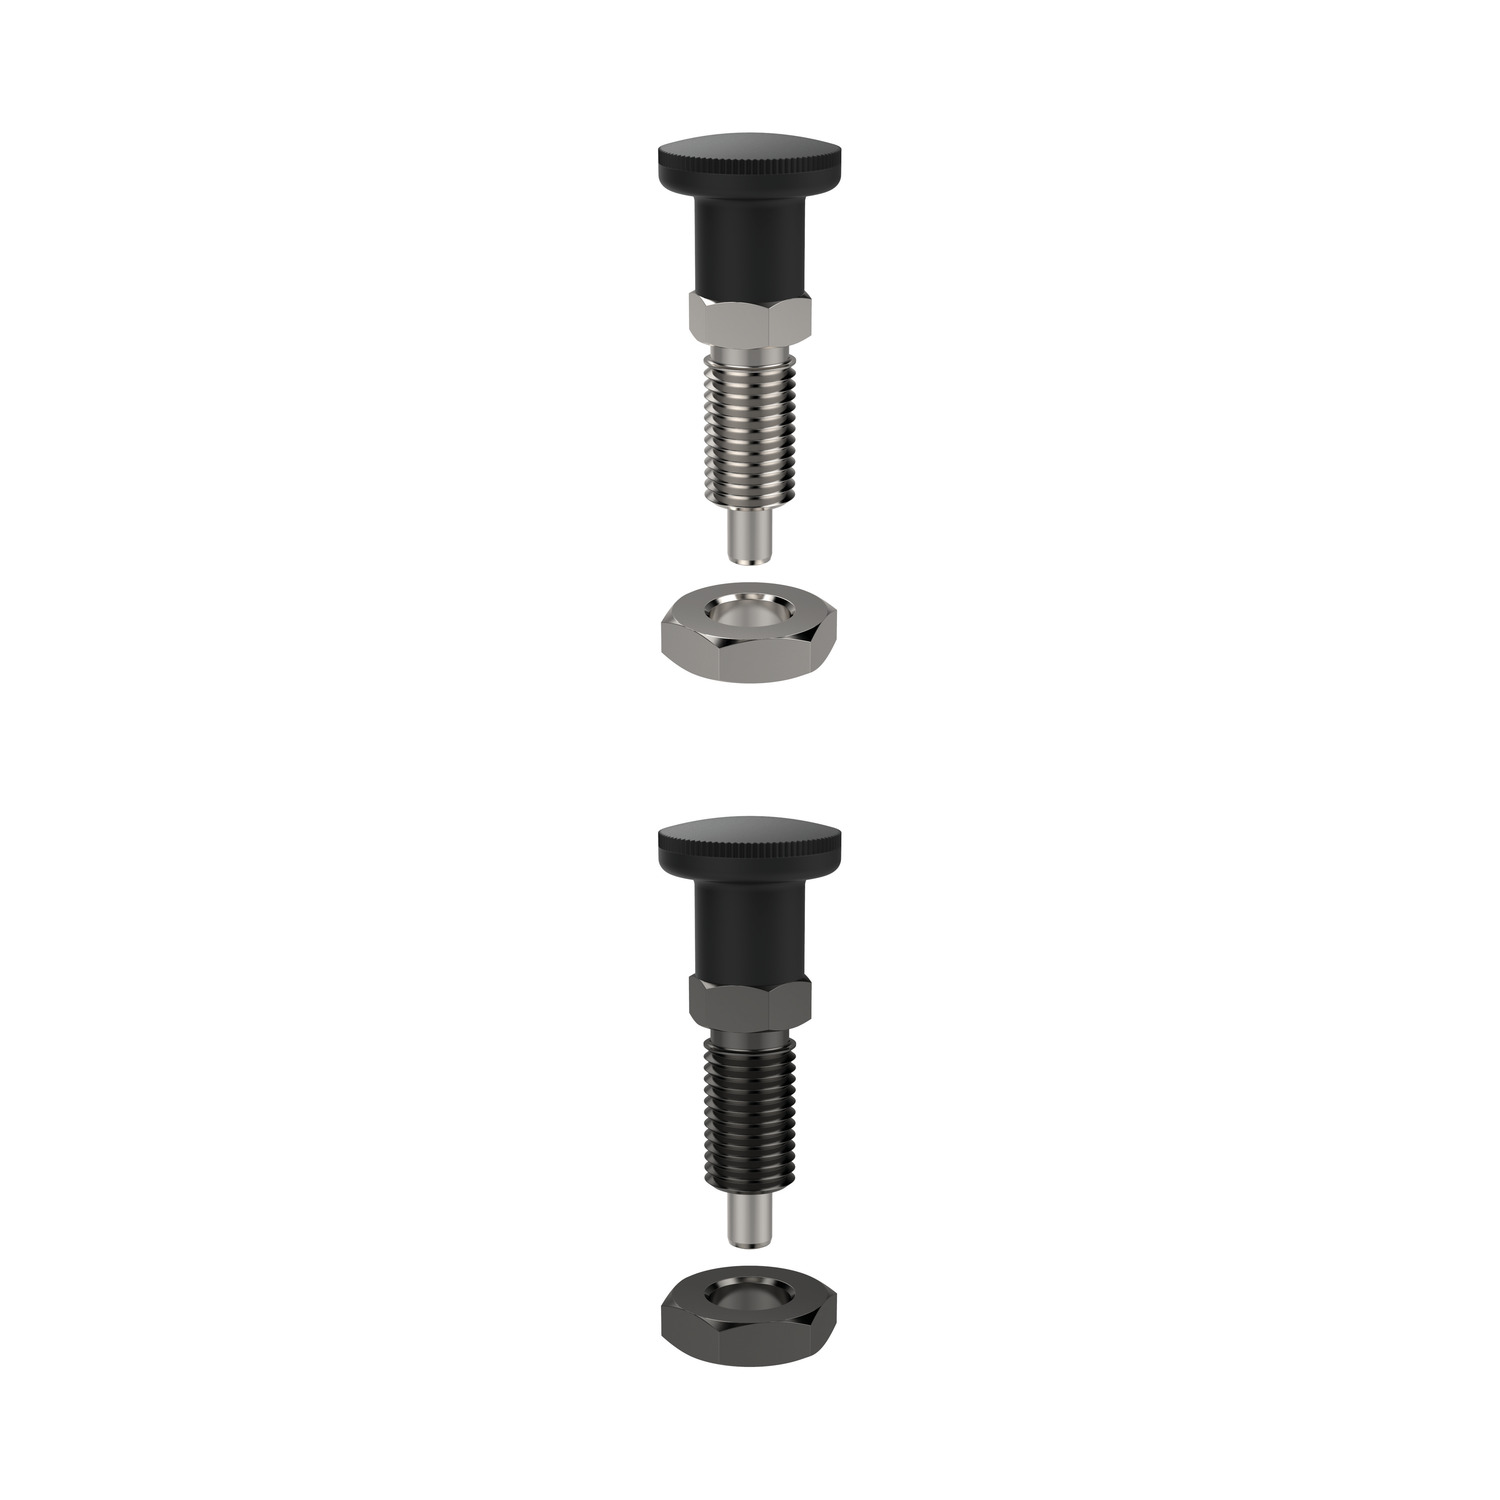 Index Plungers - Compact The locking variation of the compact index plunger comes in steel and stainless steel. Engagement of the locking element requires a simple pull back and 90° twist of the plastic grip.